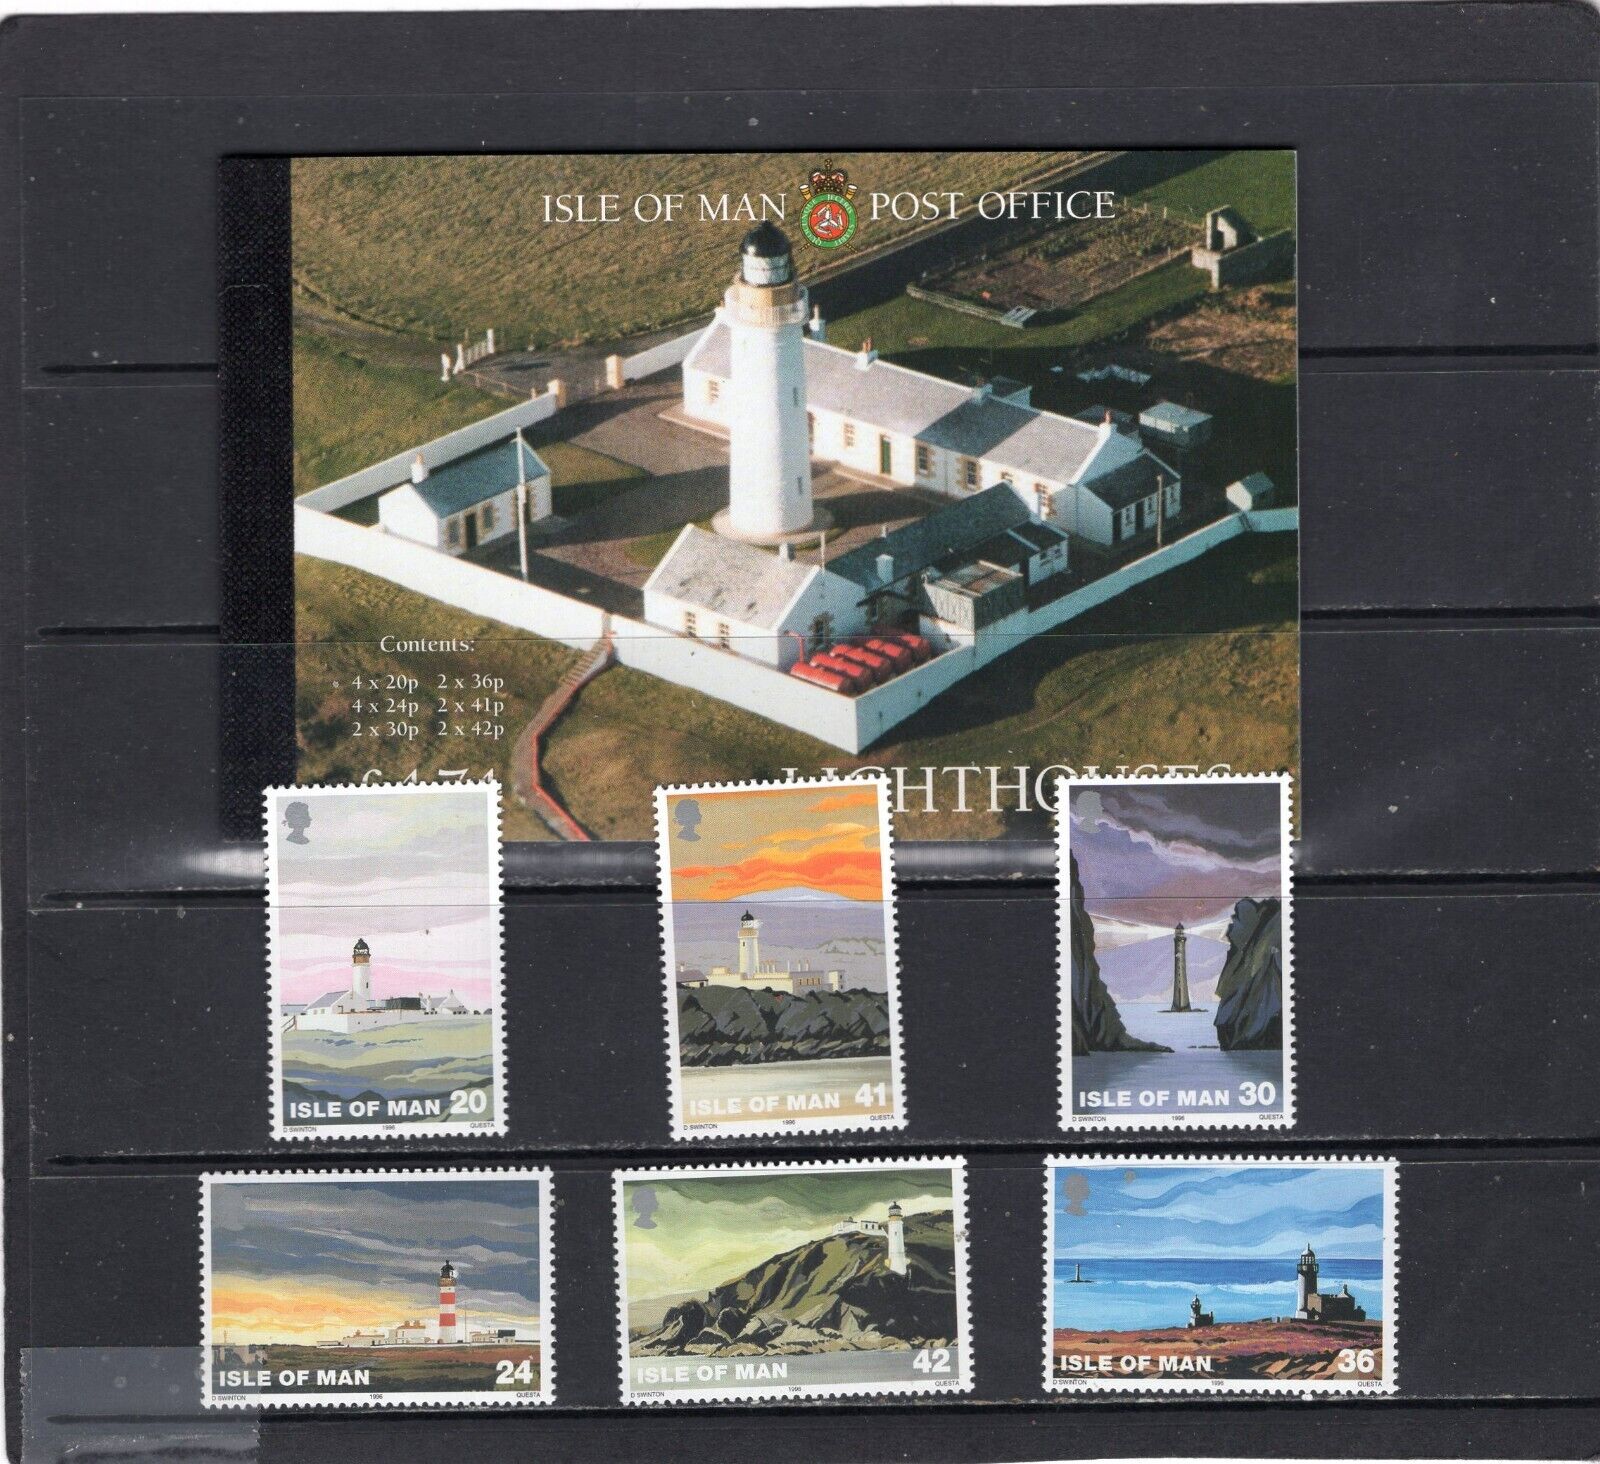 ISLE OF MAN 1996 LIGHTHOUSES SET OF 6 STAMPS & COMPLETE BOOKLET  MNH